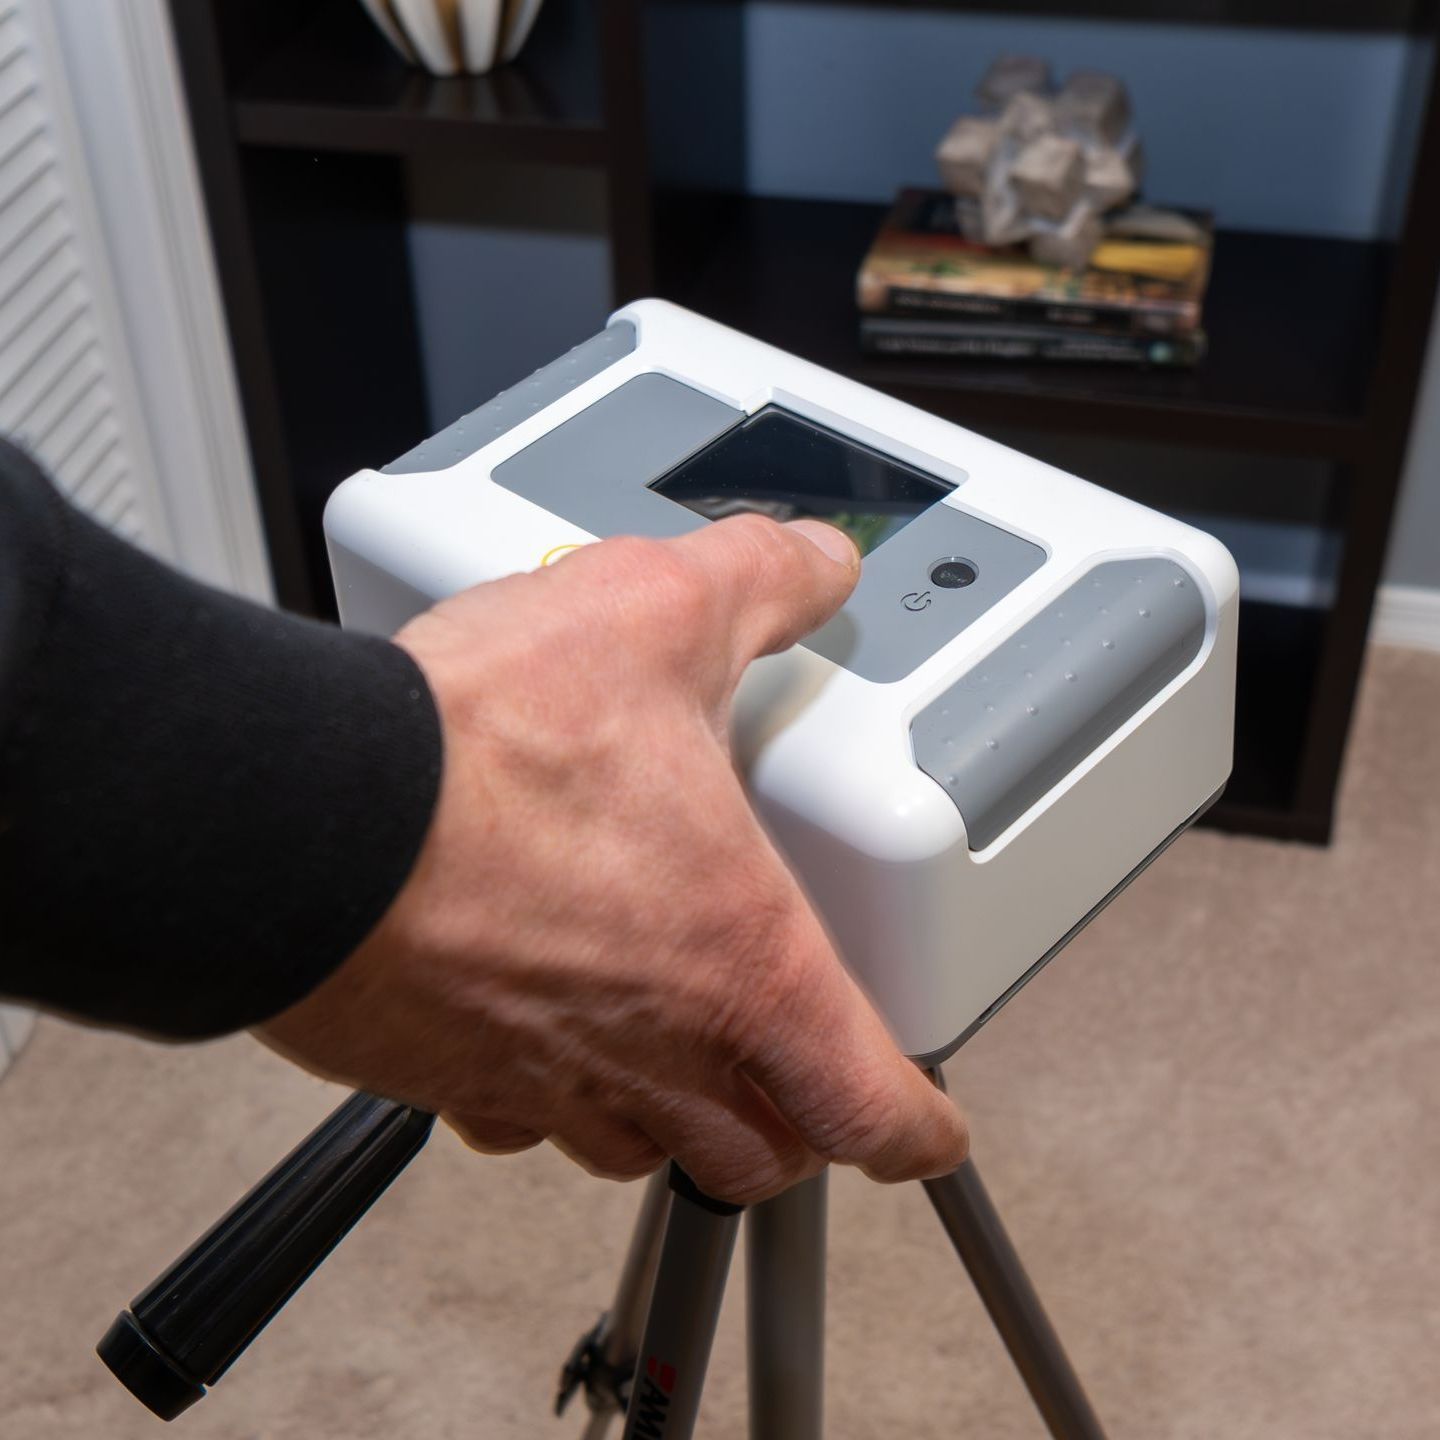 A person is holding a white radon testing device on a tripod